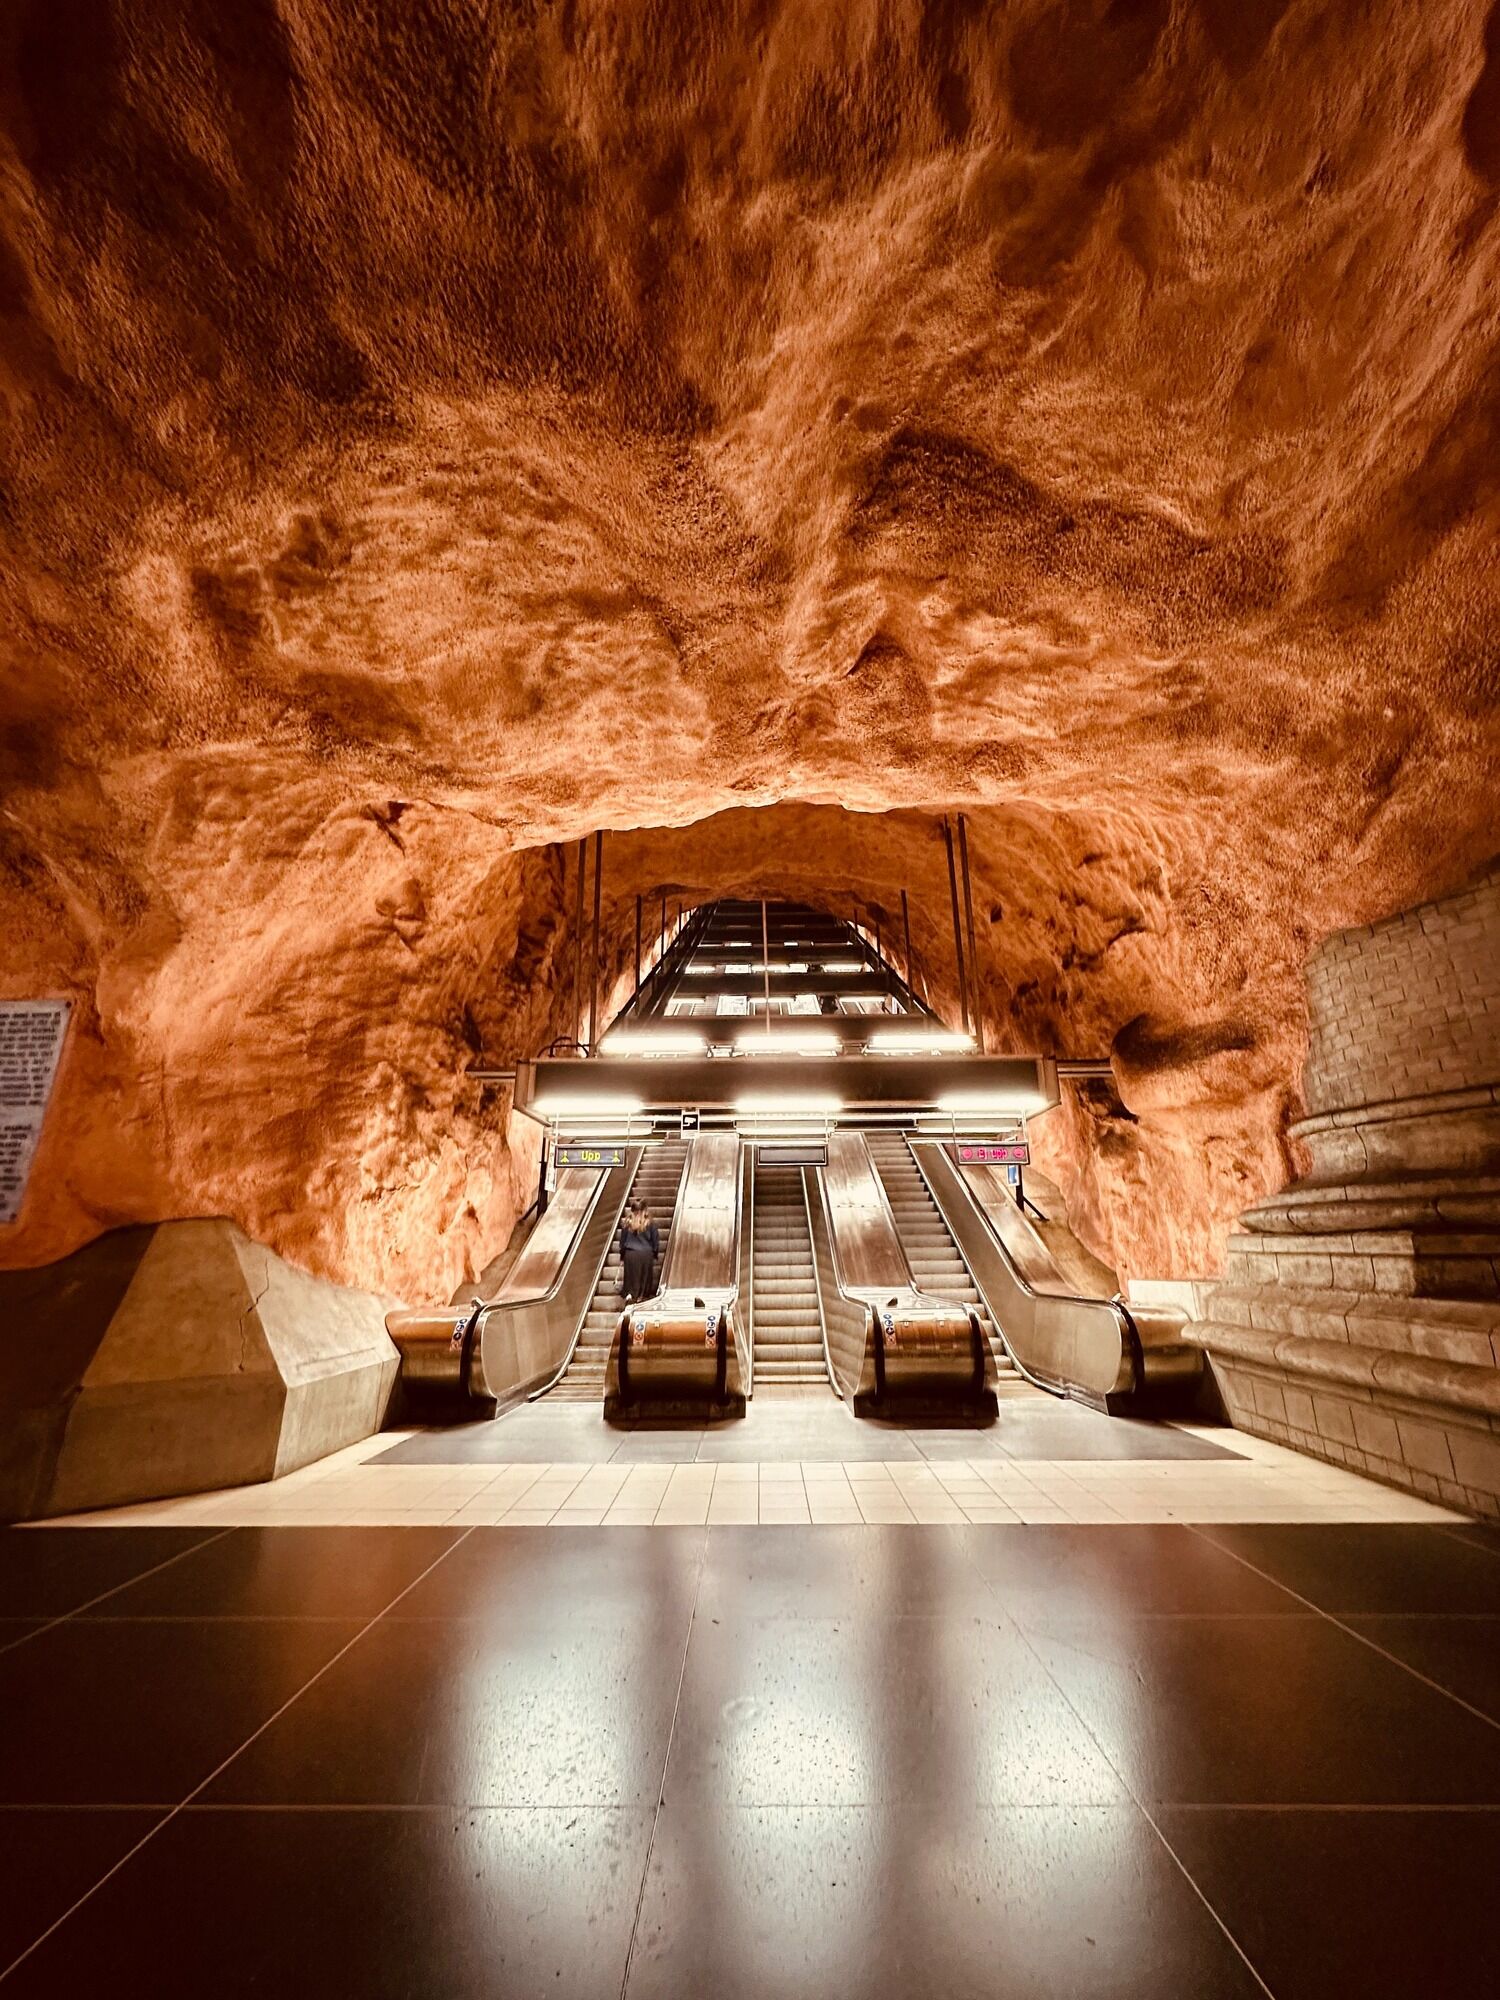 What the subway in Stockholm, which is called the world's longest art exhibition, looks like